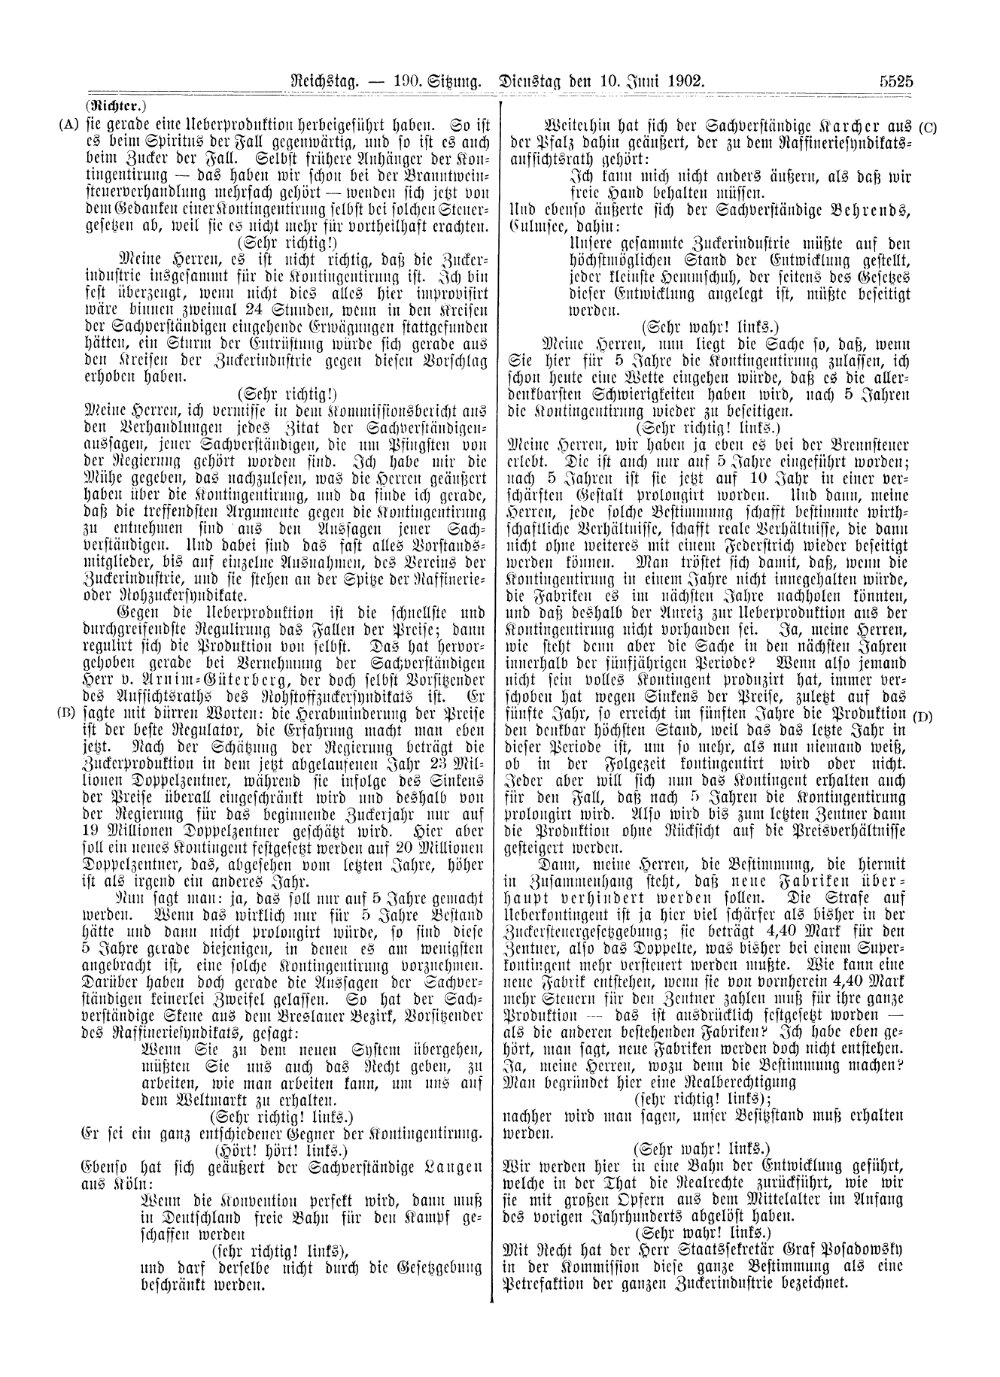 Scan of page 5525